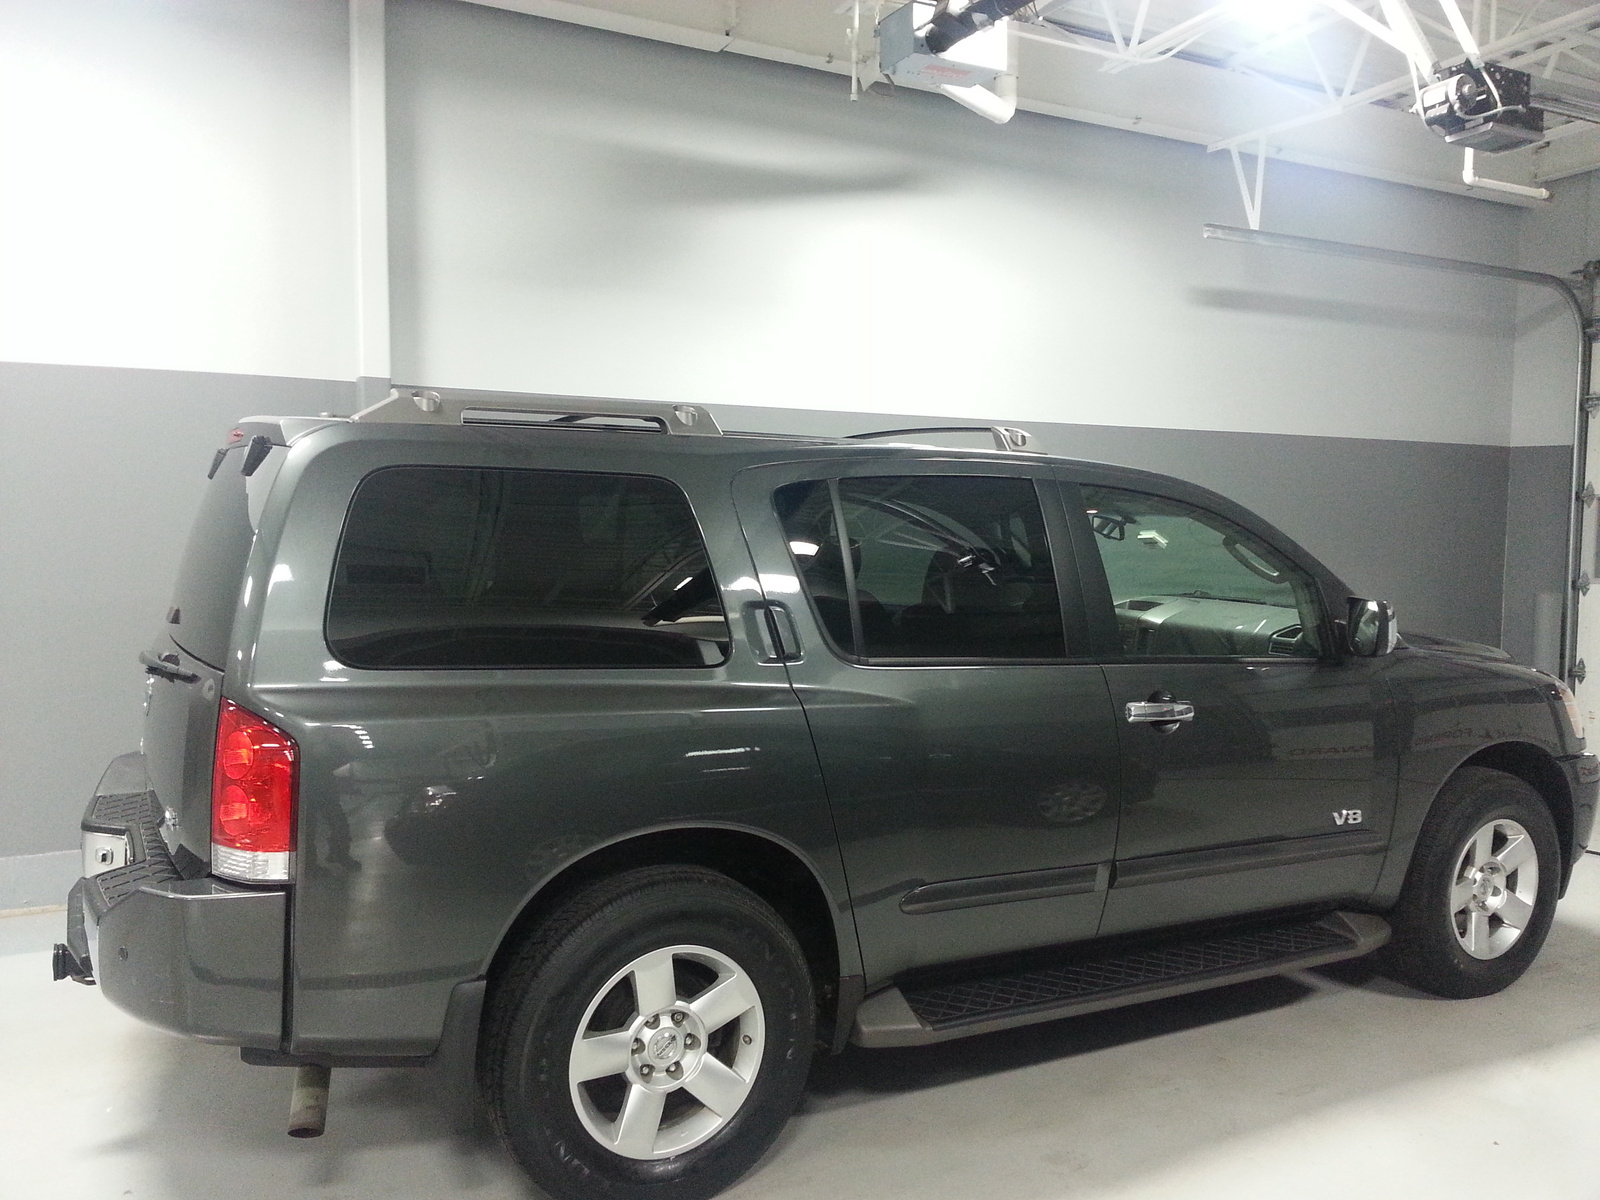 Finding a used 2007 nissan armada #2